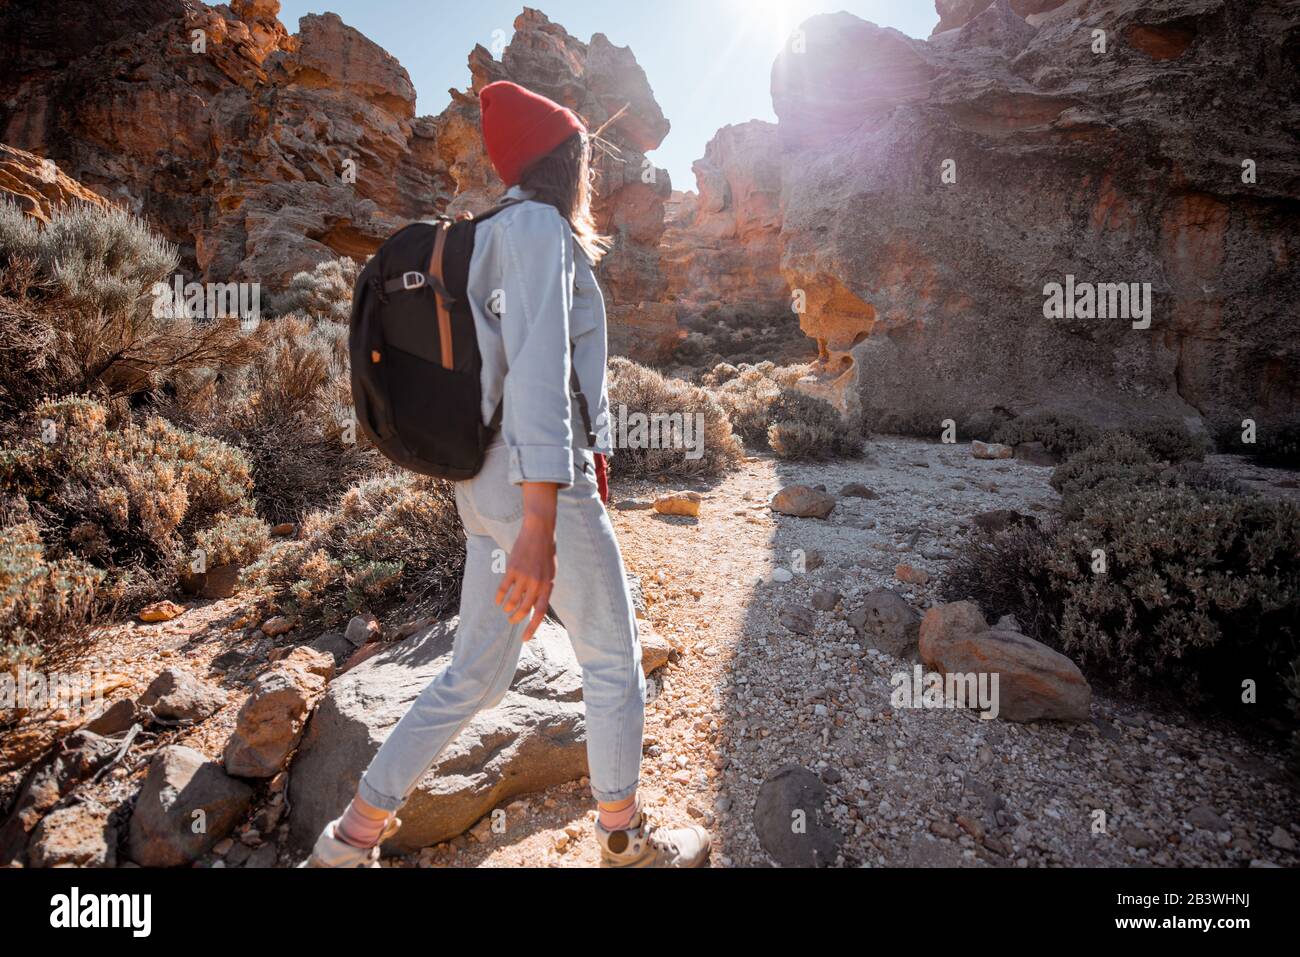 Young female traveler walking on the rocky terrain between huge rocks volcanic origin during a sunny day. Image focused on the background, woman is out of focus Stock Photo